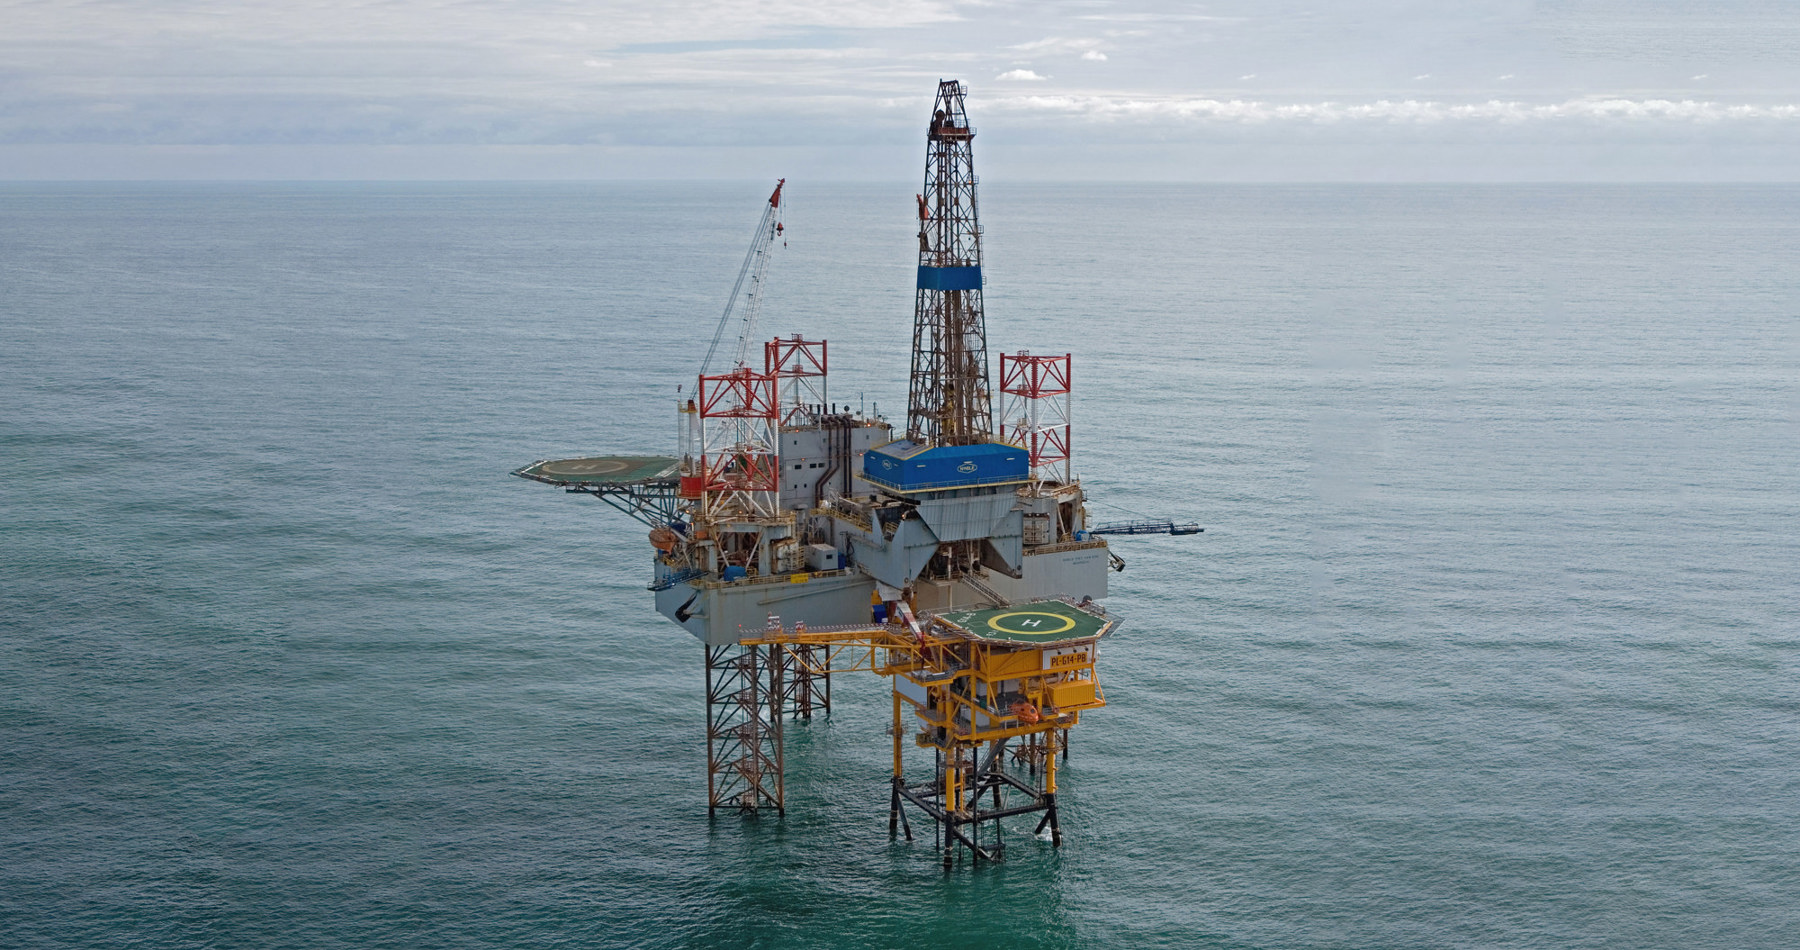 Wagenborg secures its first decommissioning project for topside and jacket transportation